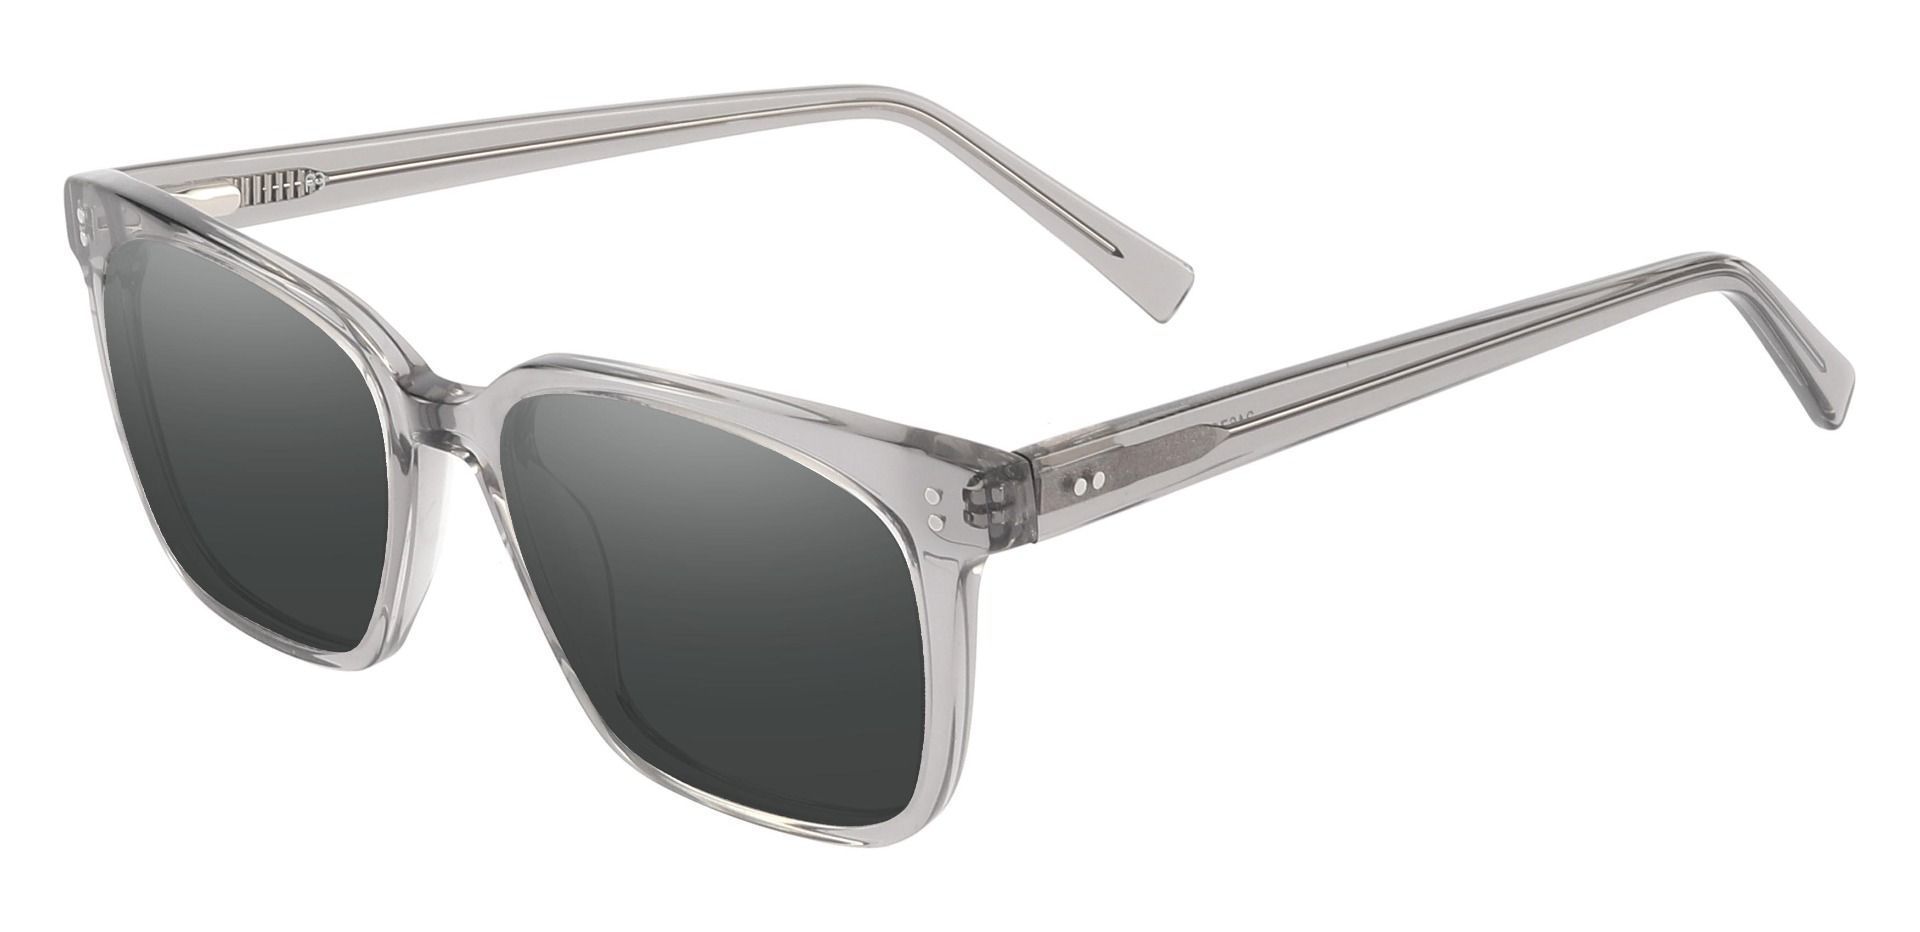 Apex Rectangle Non-Rx Sunglasses - Gray Frame With Gray Lenses